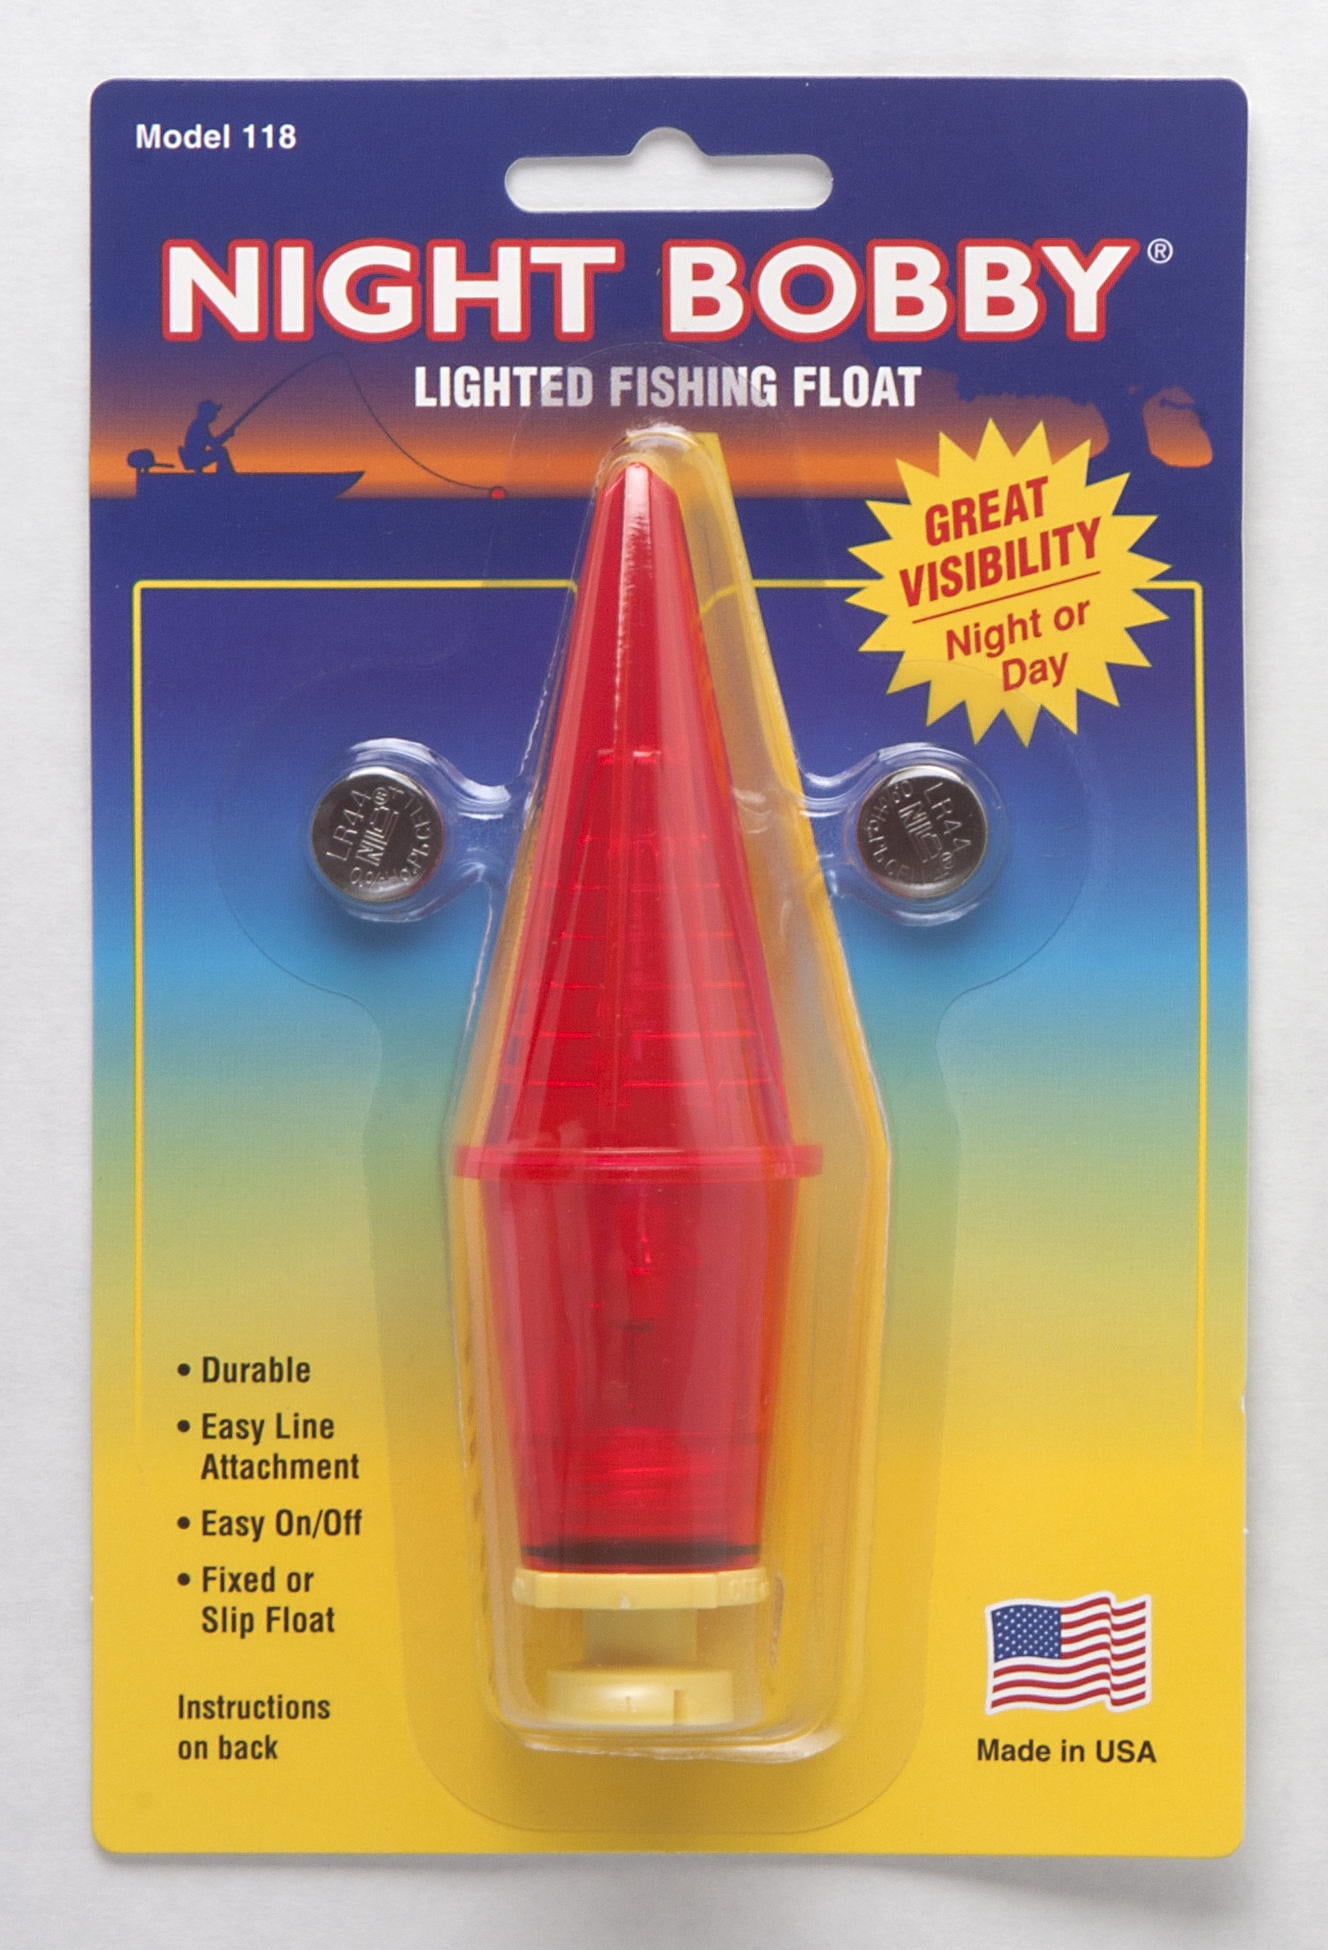 DIY: Home made water-proof fishing light float/bobber that costs